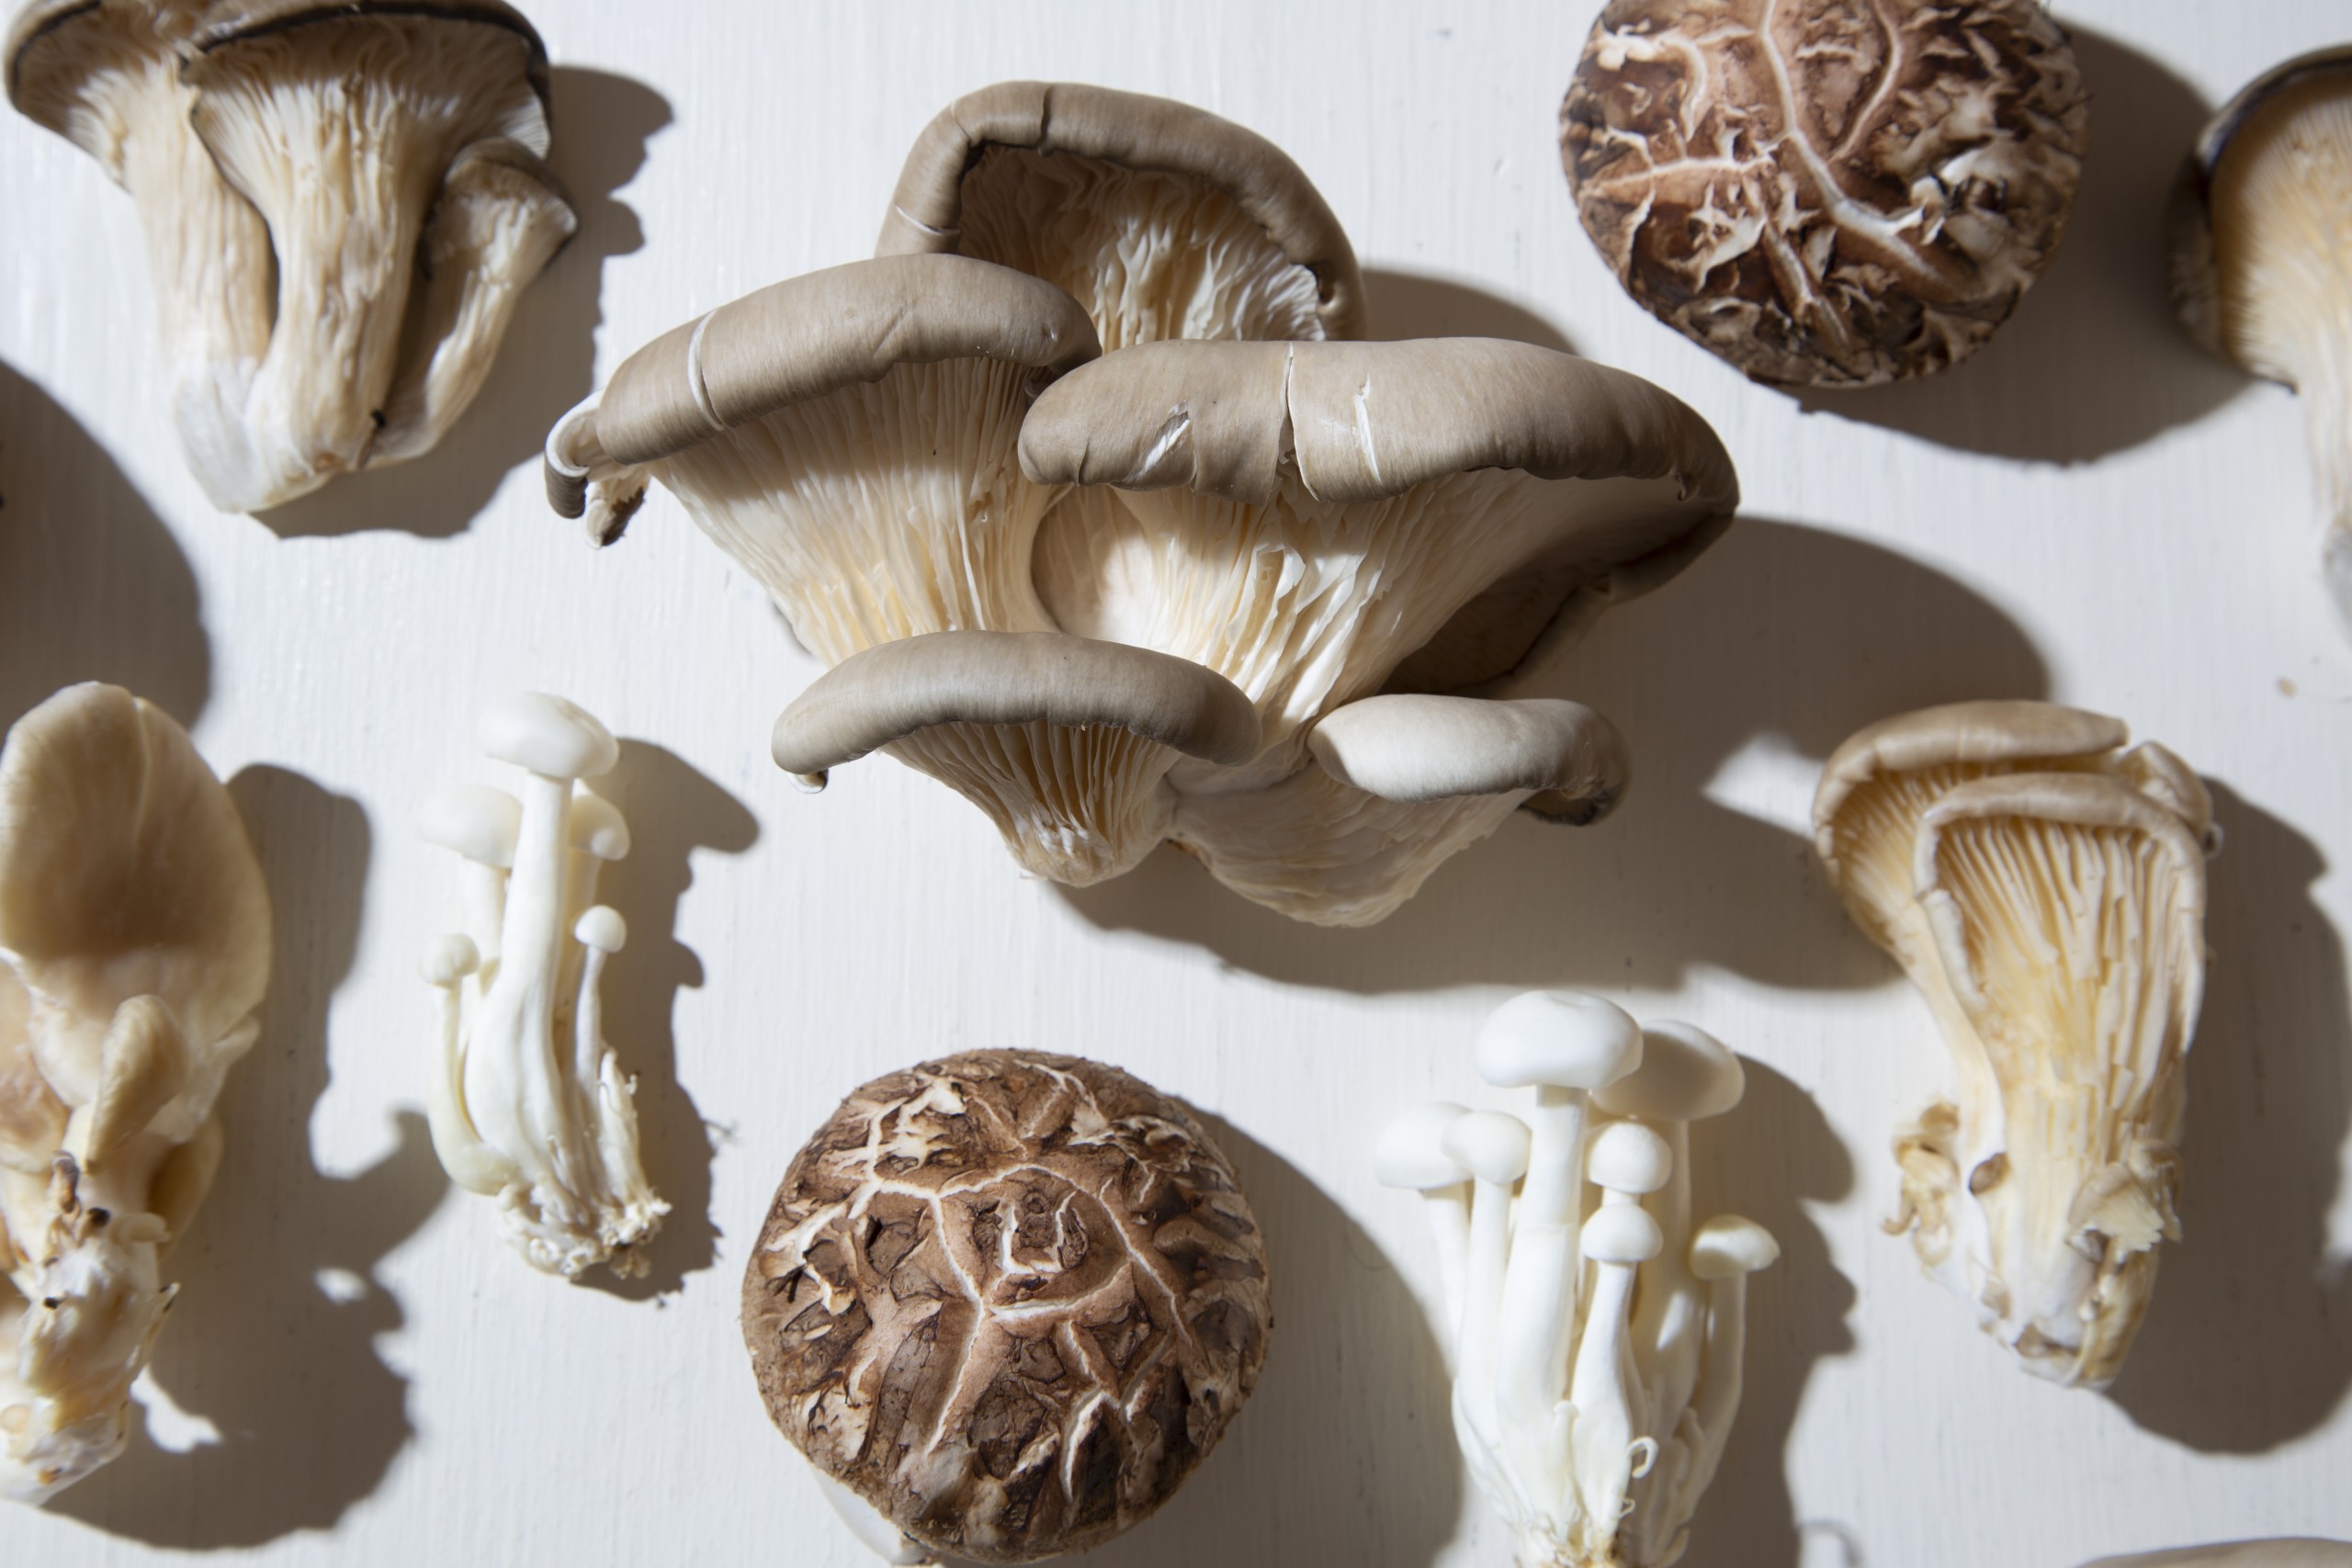 Are Mushrooms the Key to Our Future?